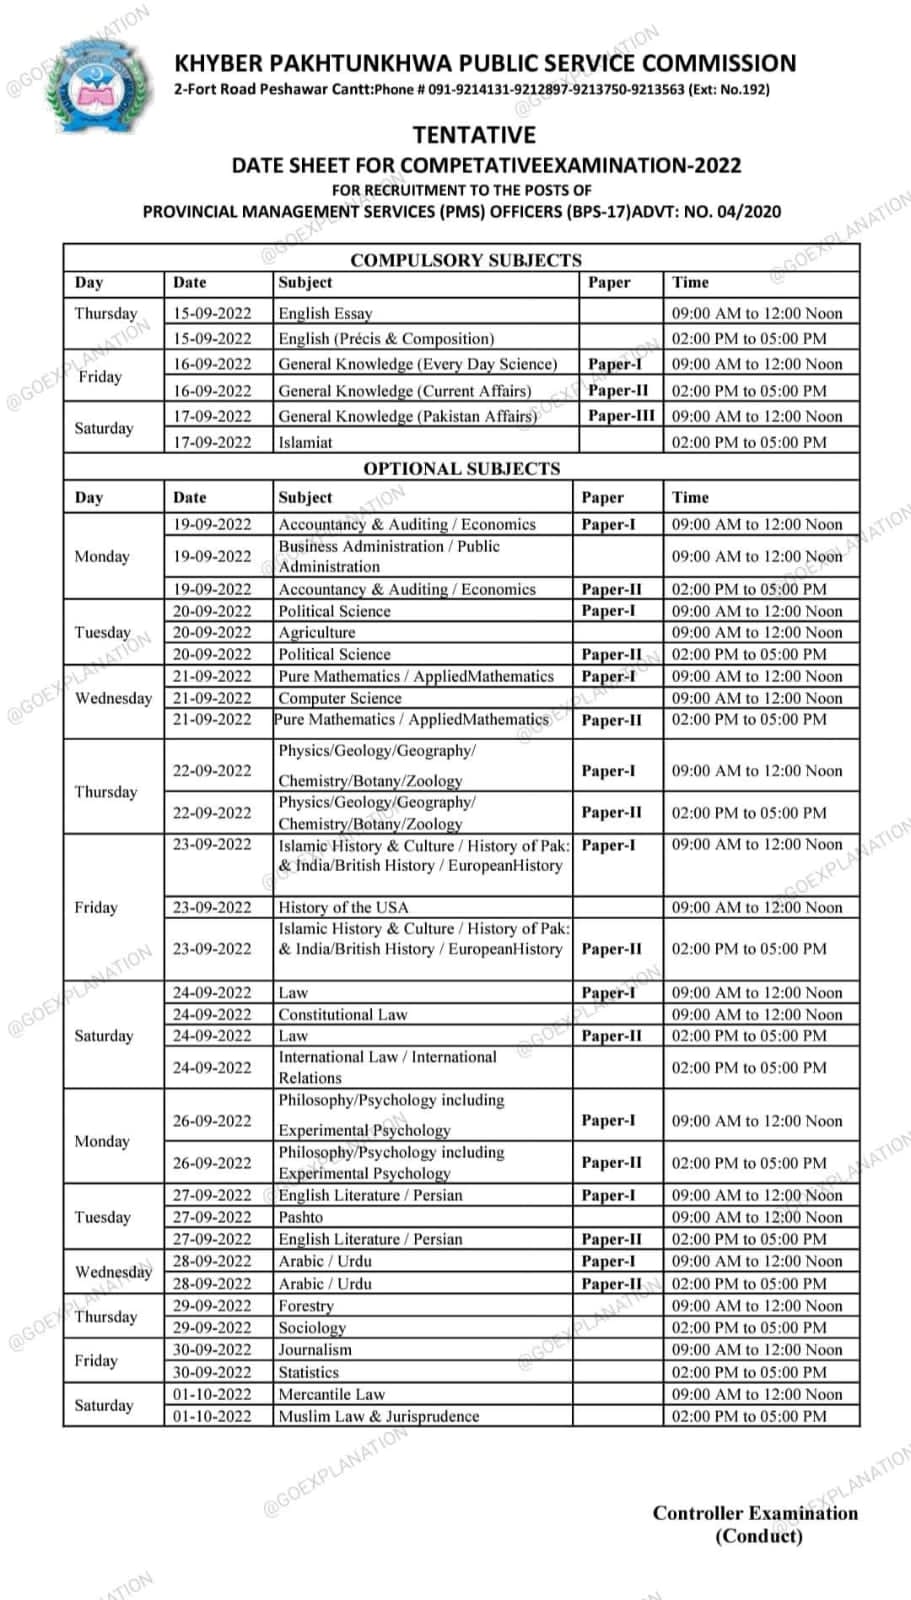 KPPSC Competitive Examination Date Sheet 2022 (Test & Interview)